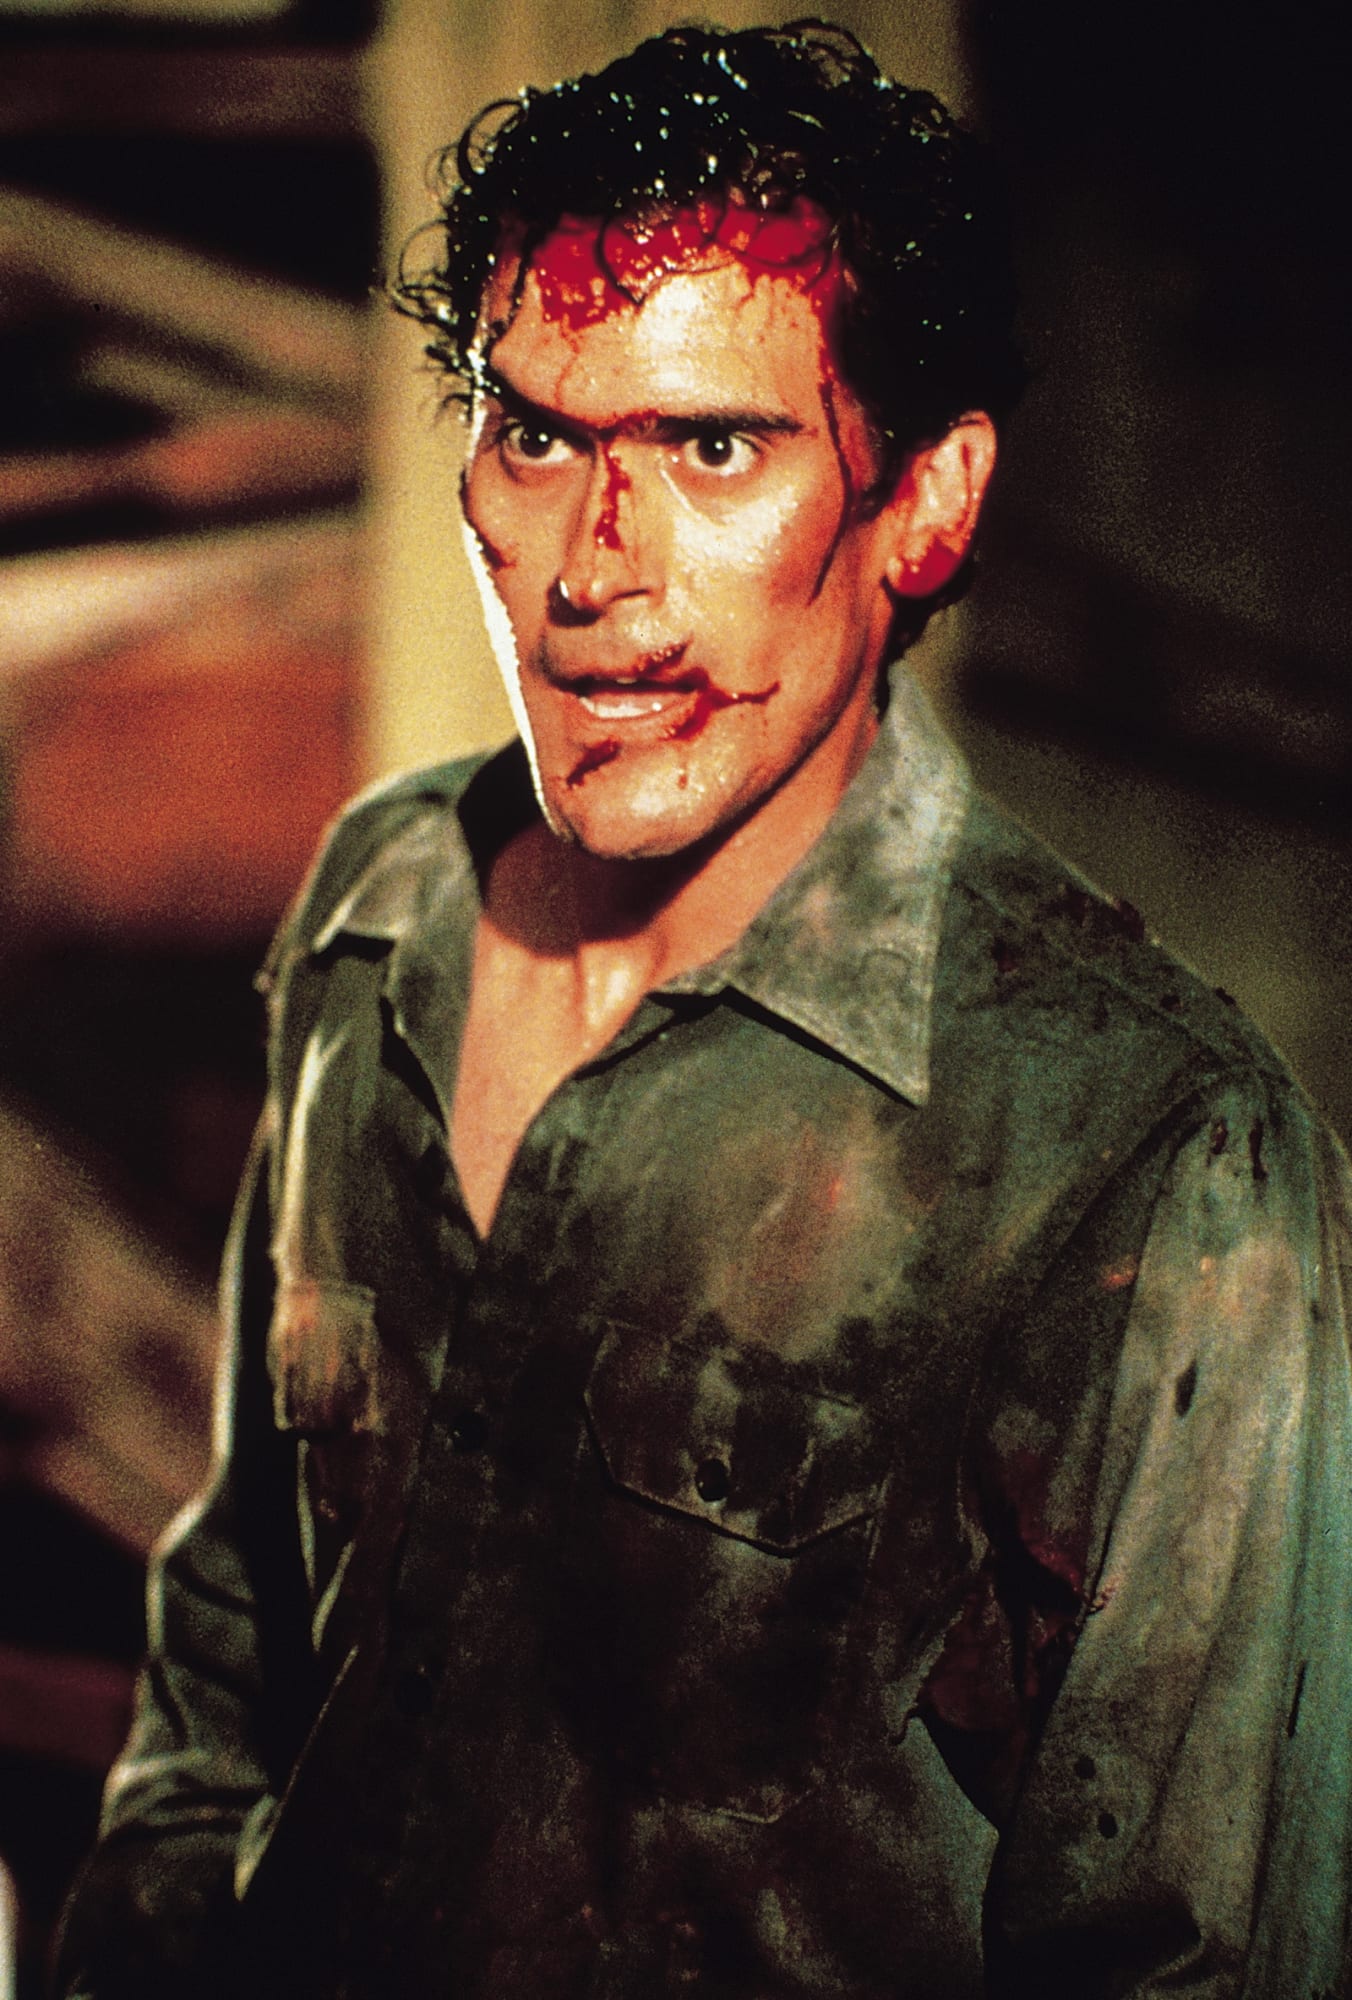 Bruce Campbell: 5 movie rankings that IMDb got wrong